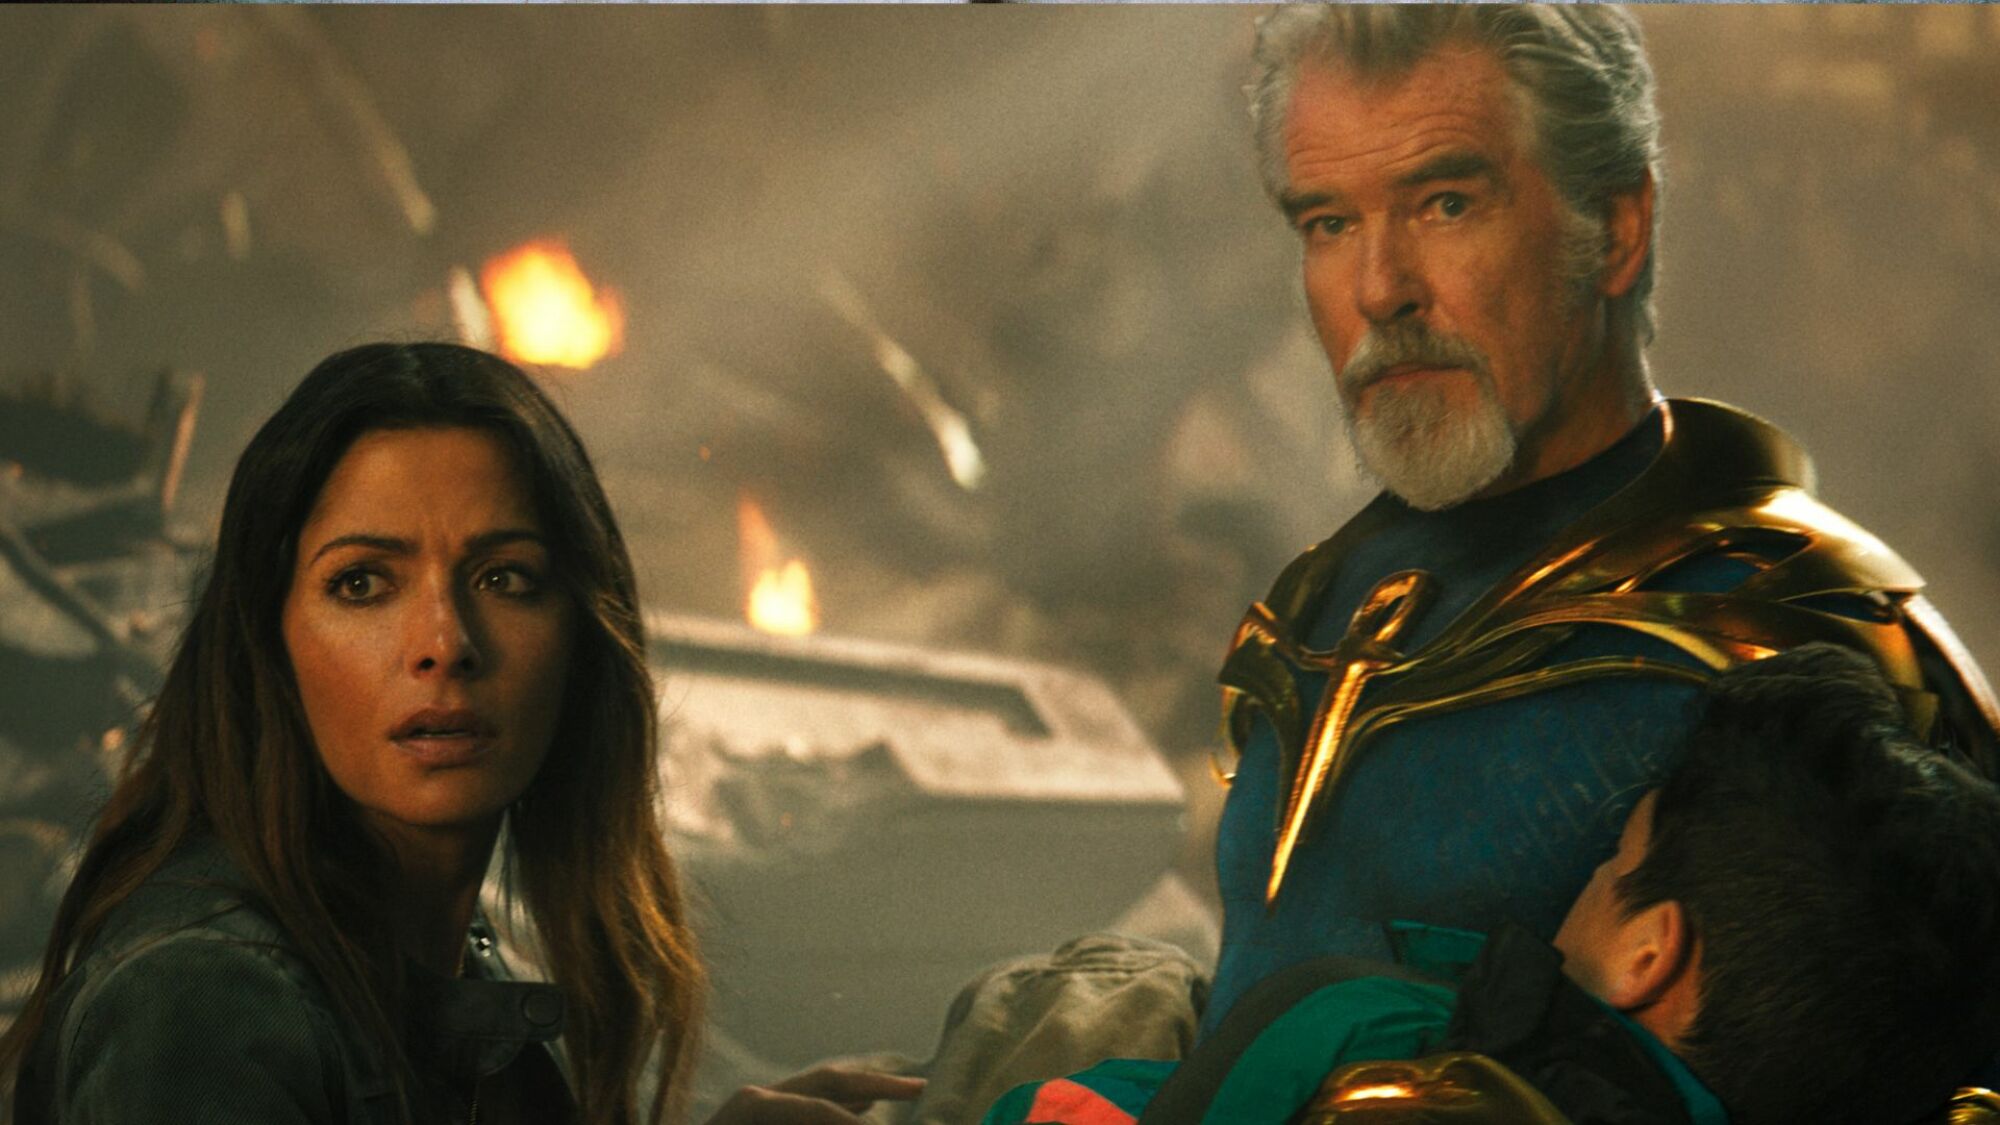 SARAH SHAHI as Adrianna and PIERCE BROSNAN as Dr. Fate in New Line Cinema’s action adventure “BLACK ADAM,” a Warner Bros. Pictures release.